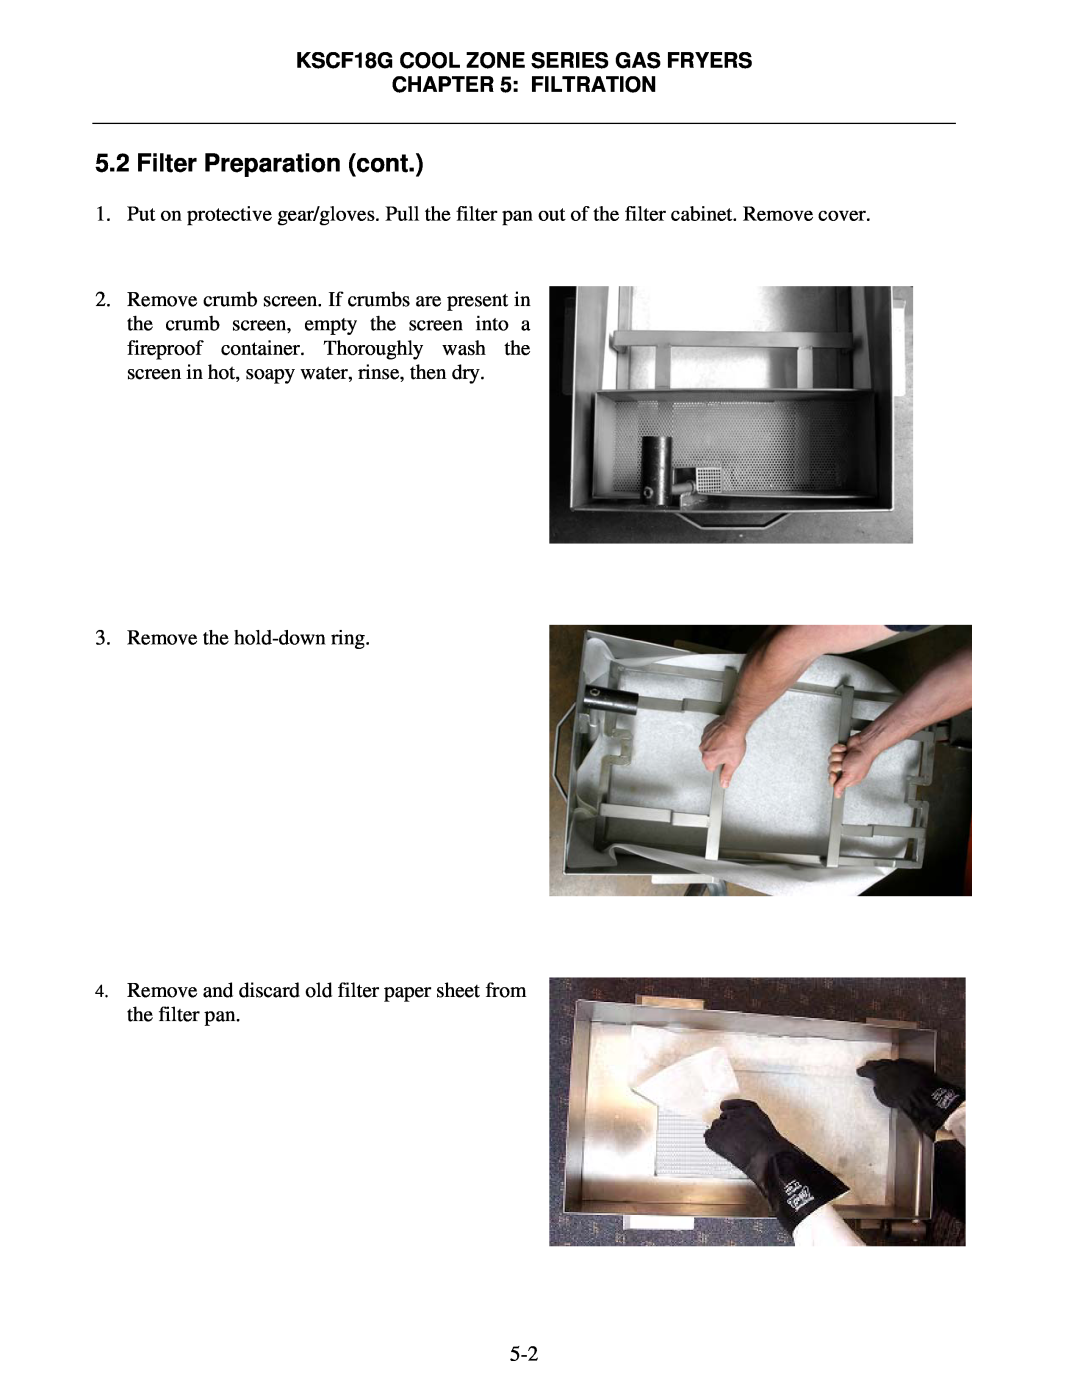 Frymaster manual Filter Preparation cont, KSCF18G COOL ZONE SERIES GAS FRYERS, Filtration 